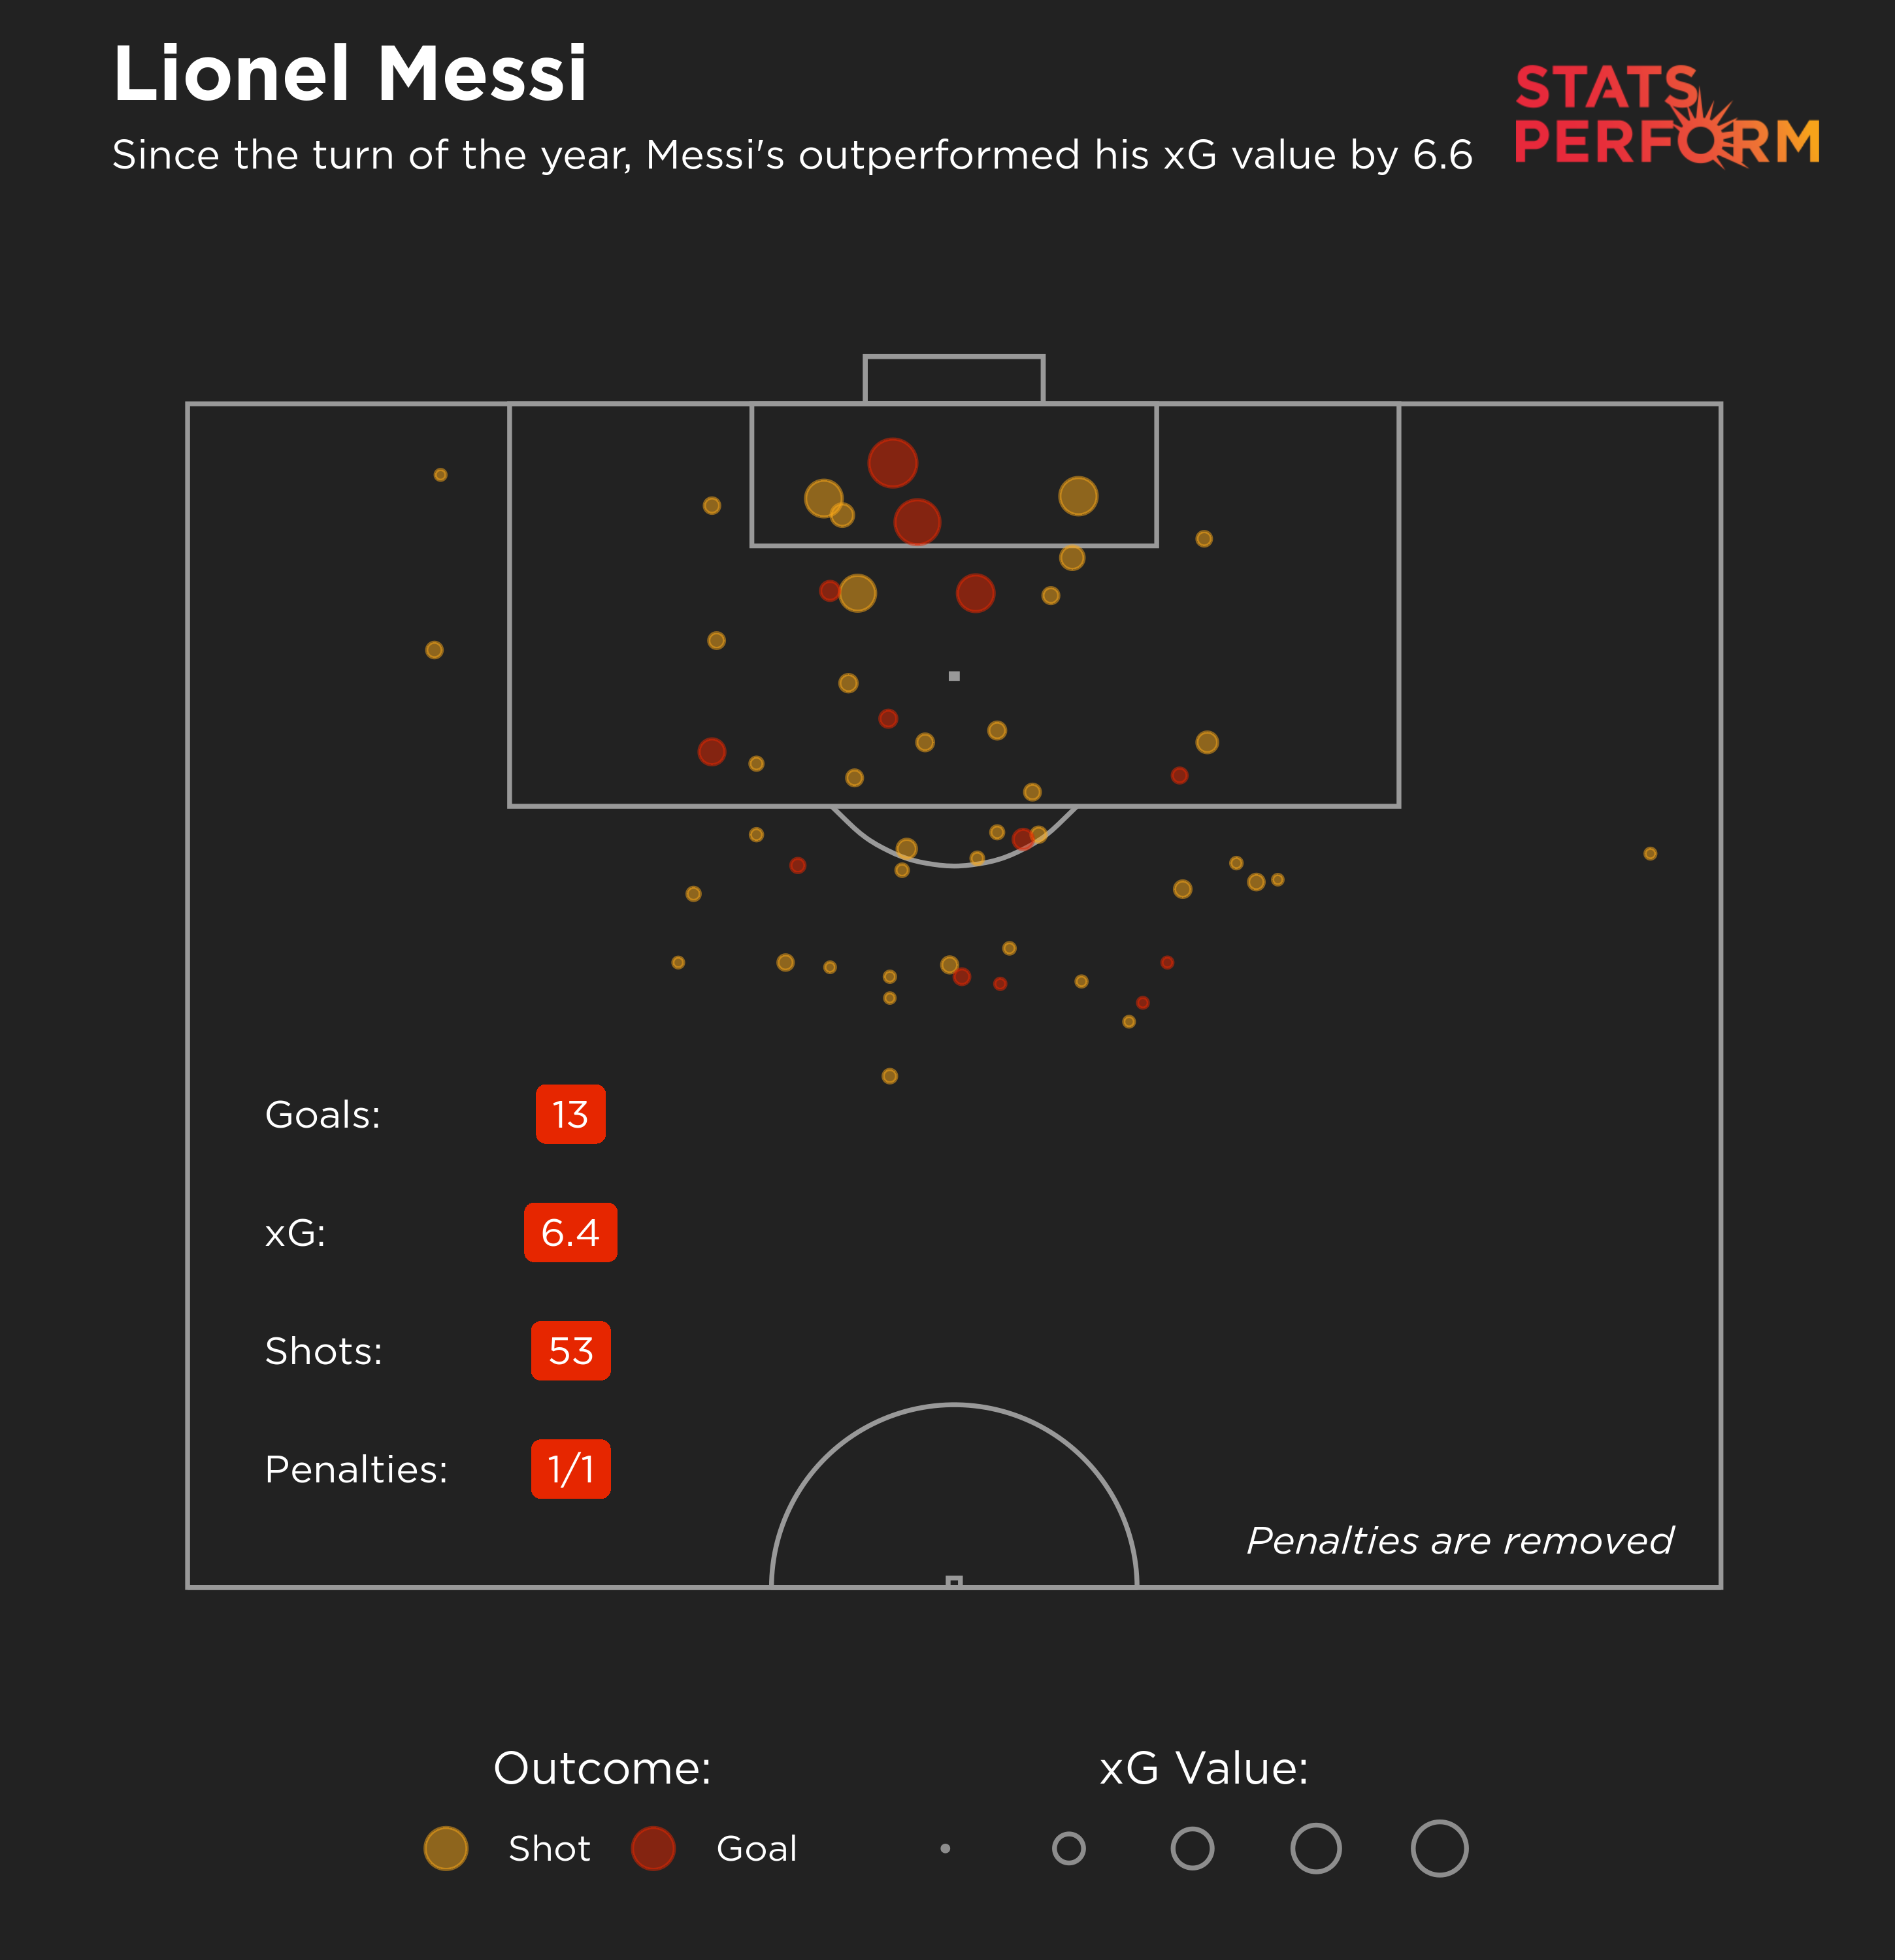 Messi has outperformed his xG by 6.6 since the turn of the year